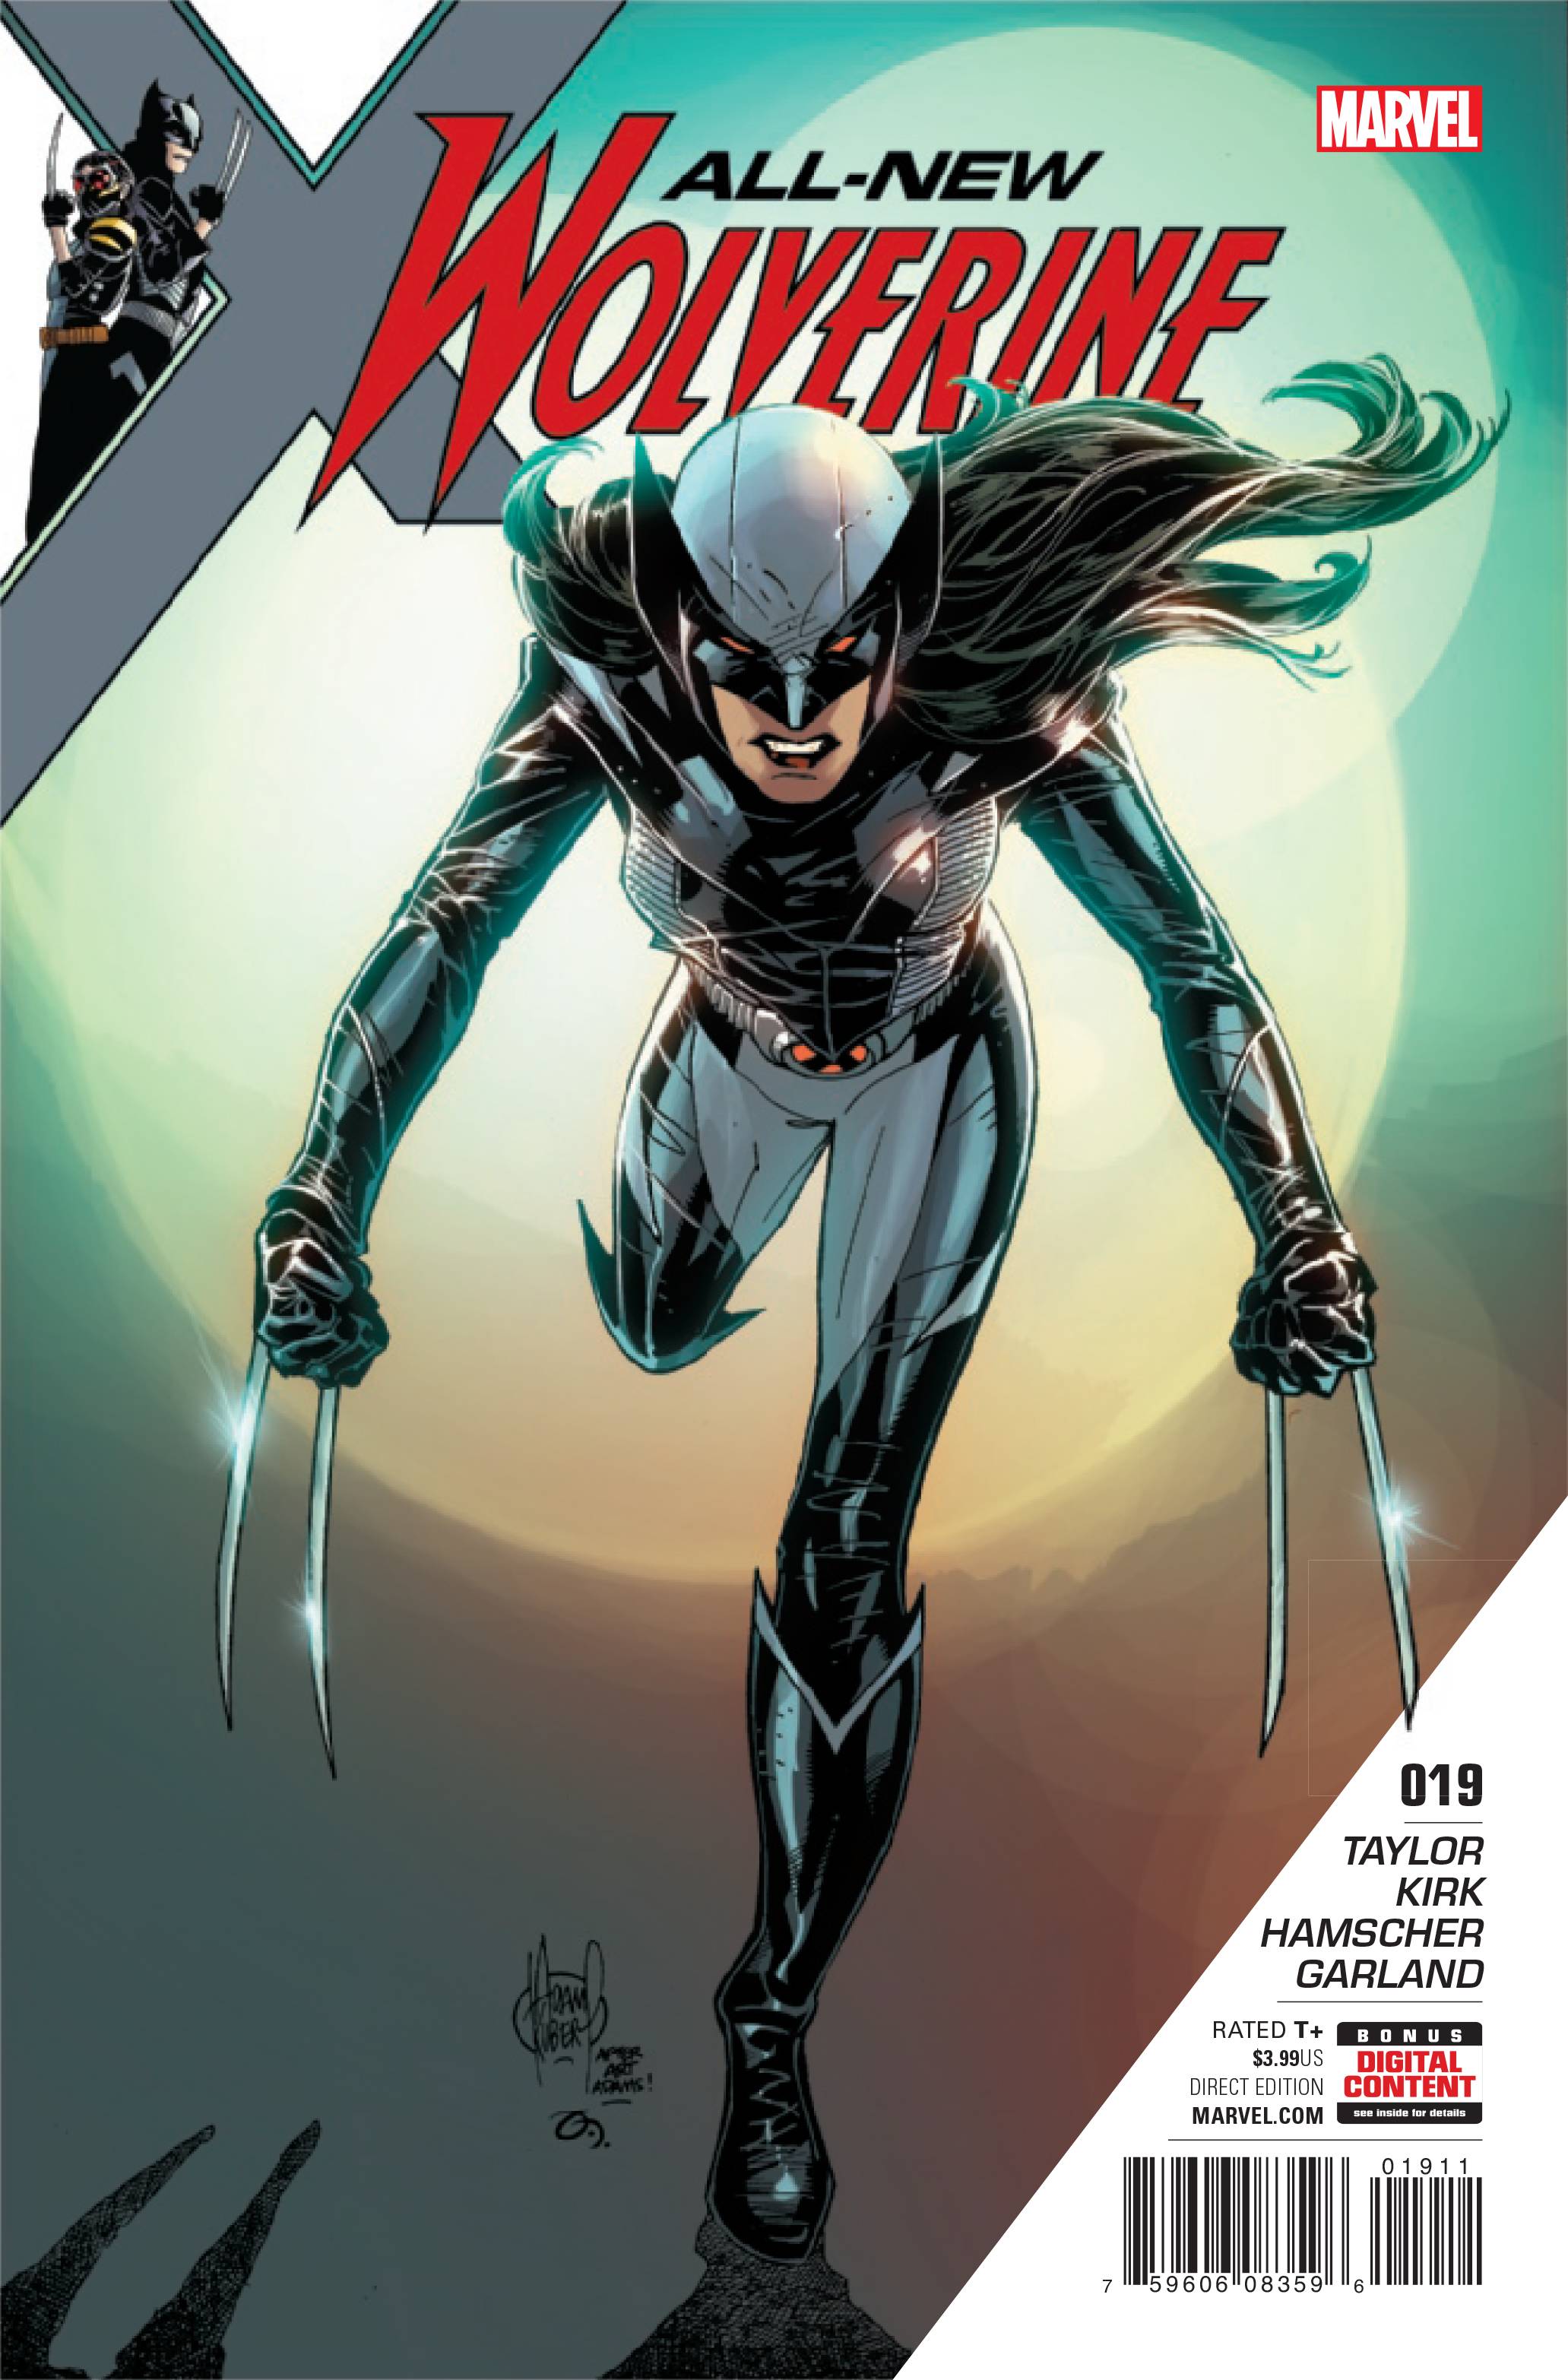 ALL-NEW WOLVERINE#19